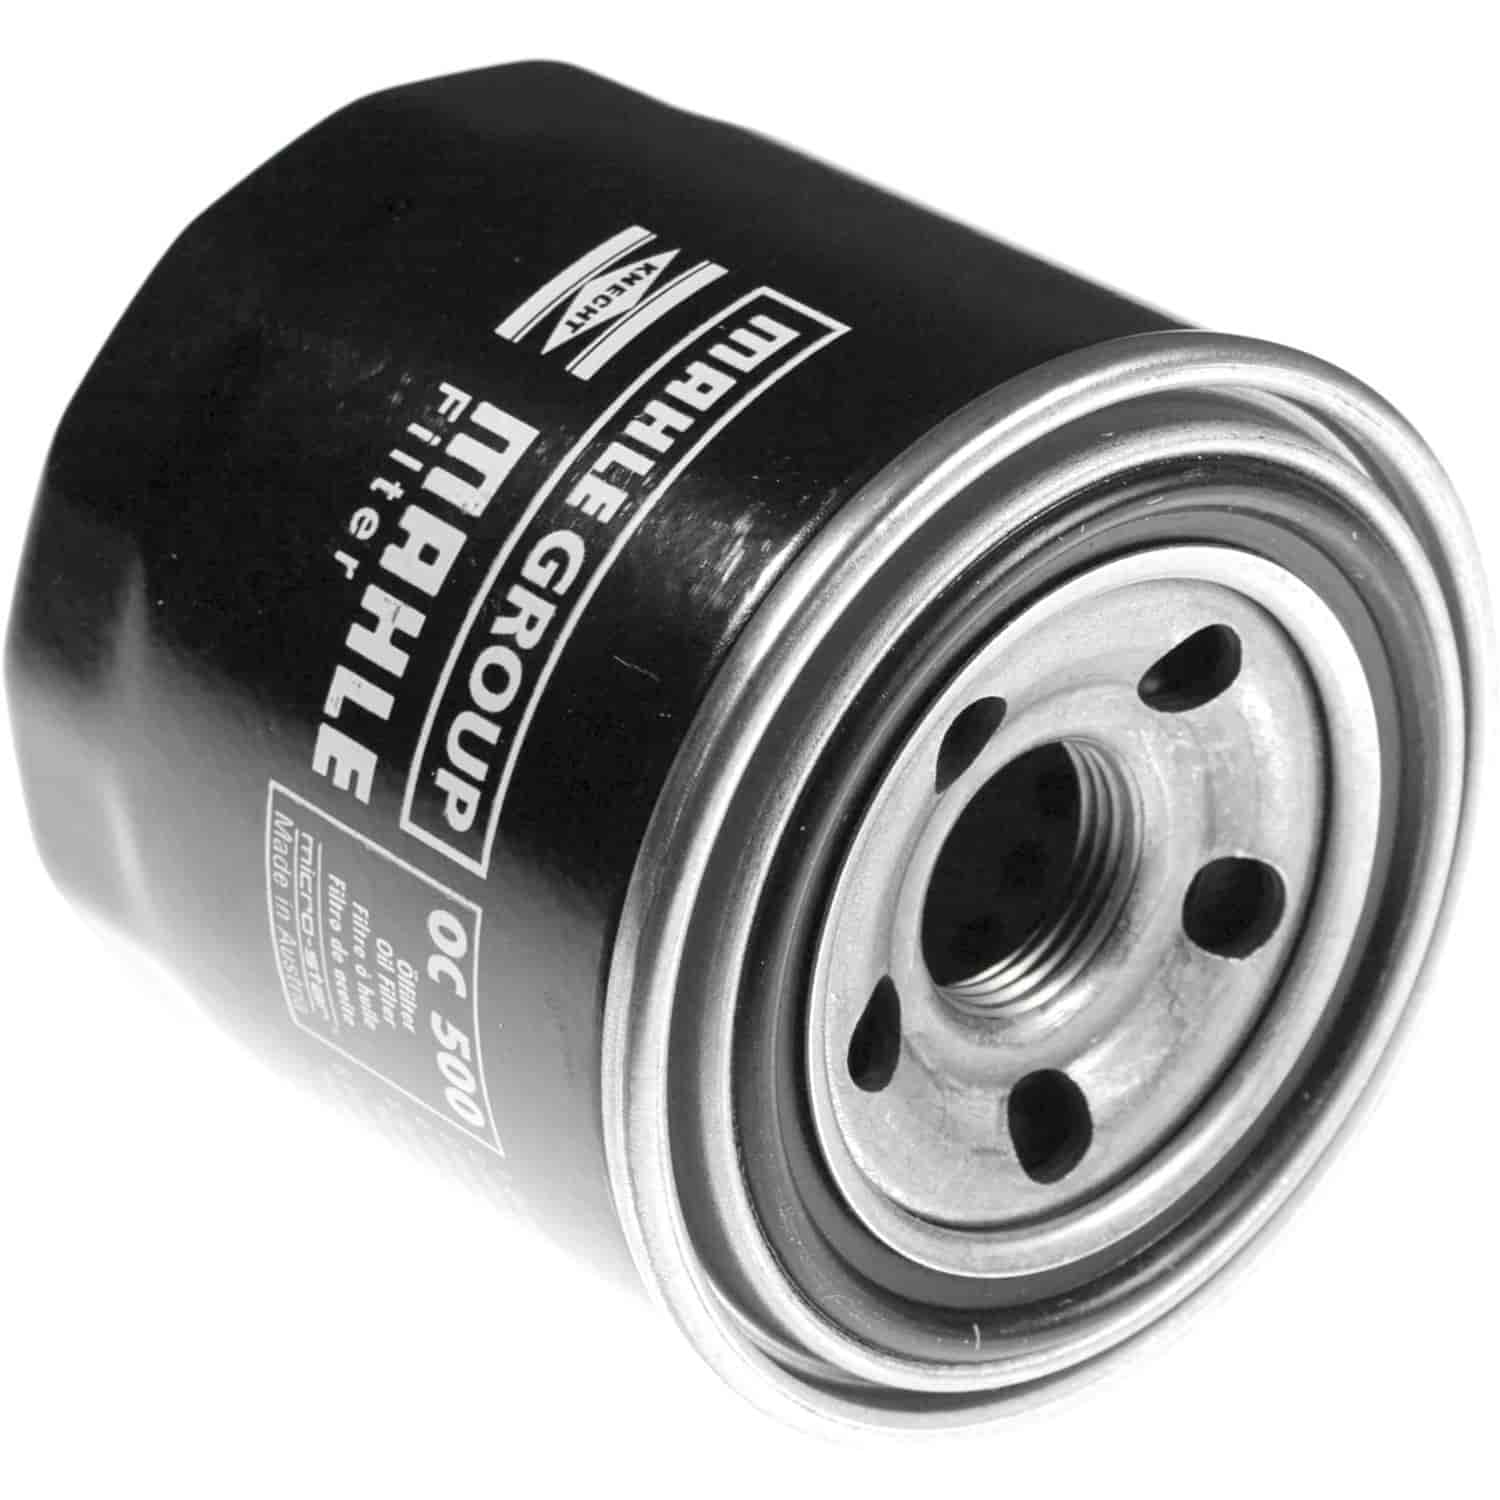 Mahle Oil Filter for Subaru Outback B9 Tribeca